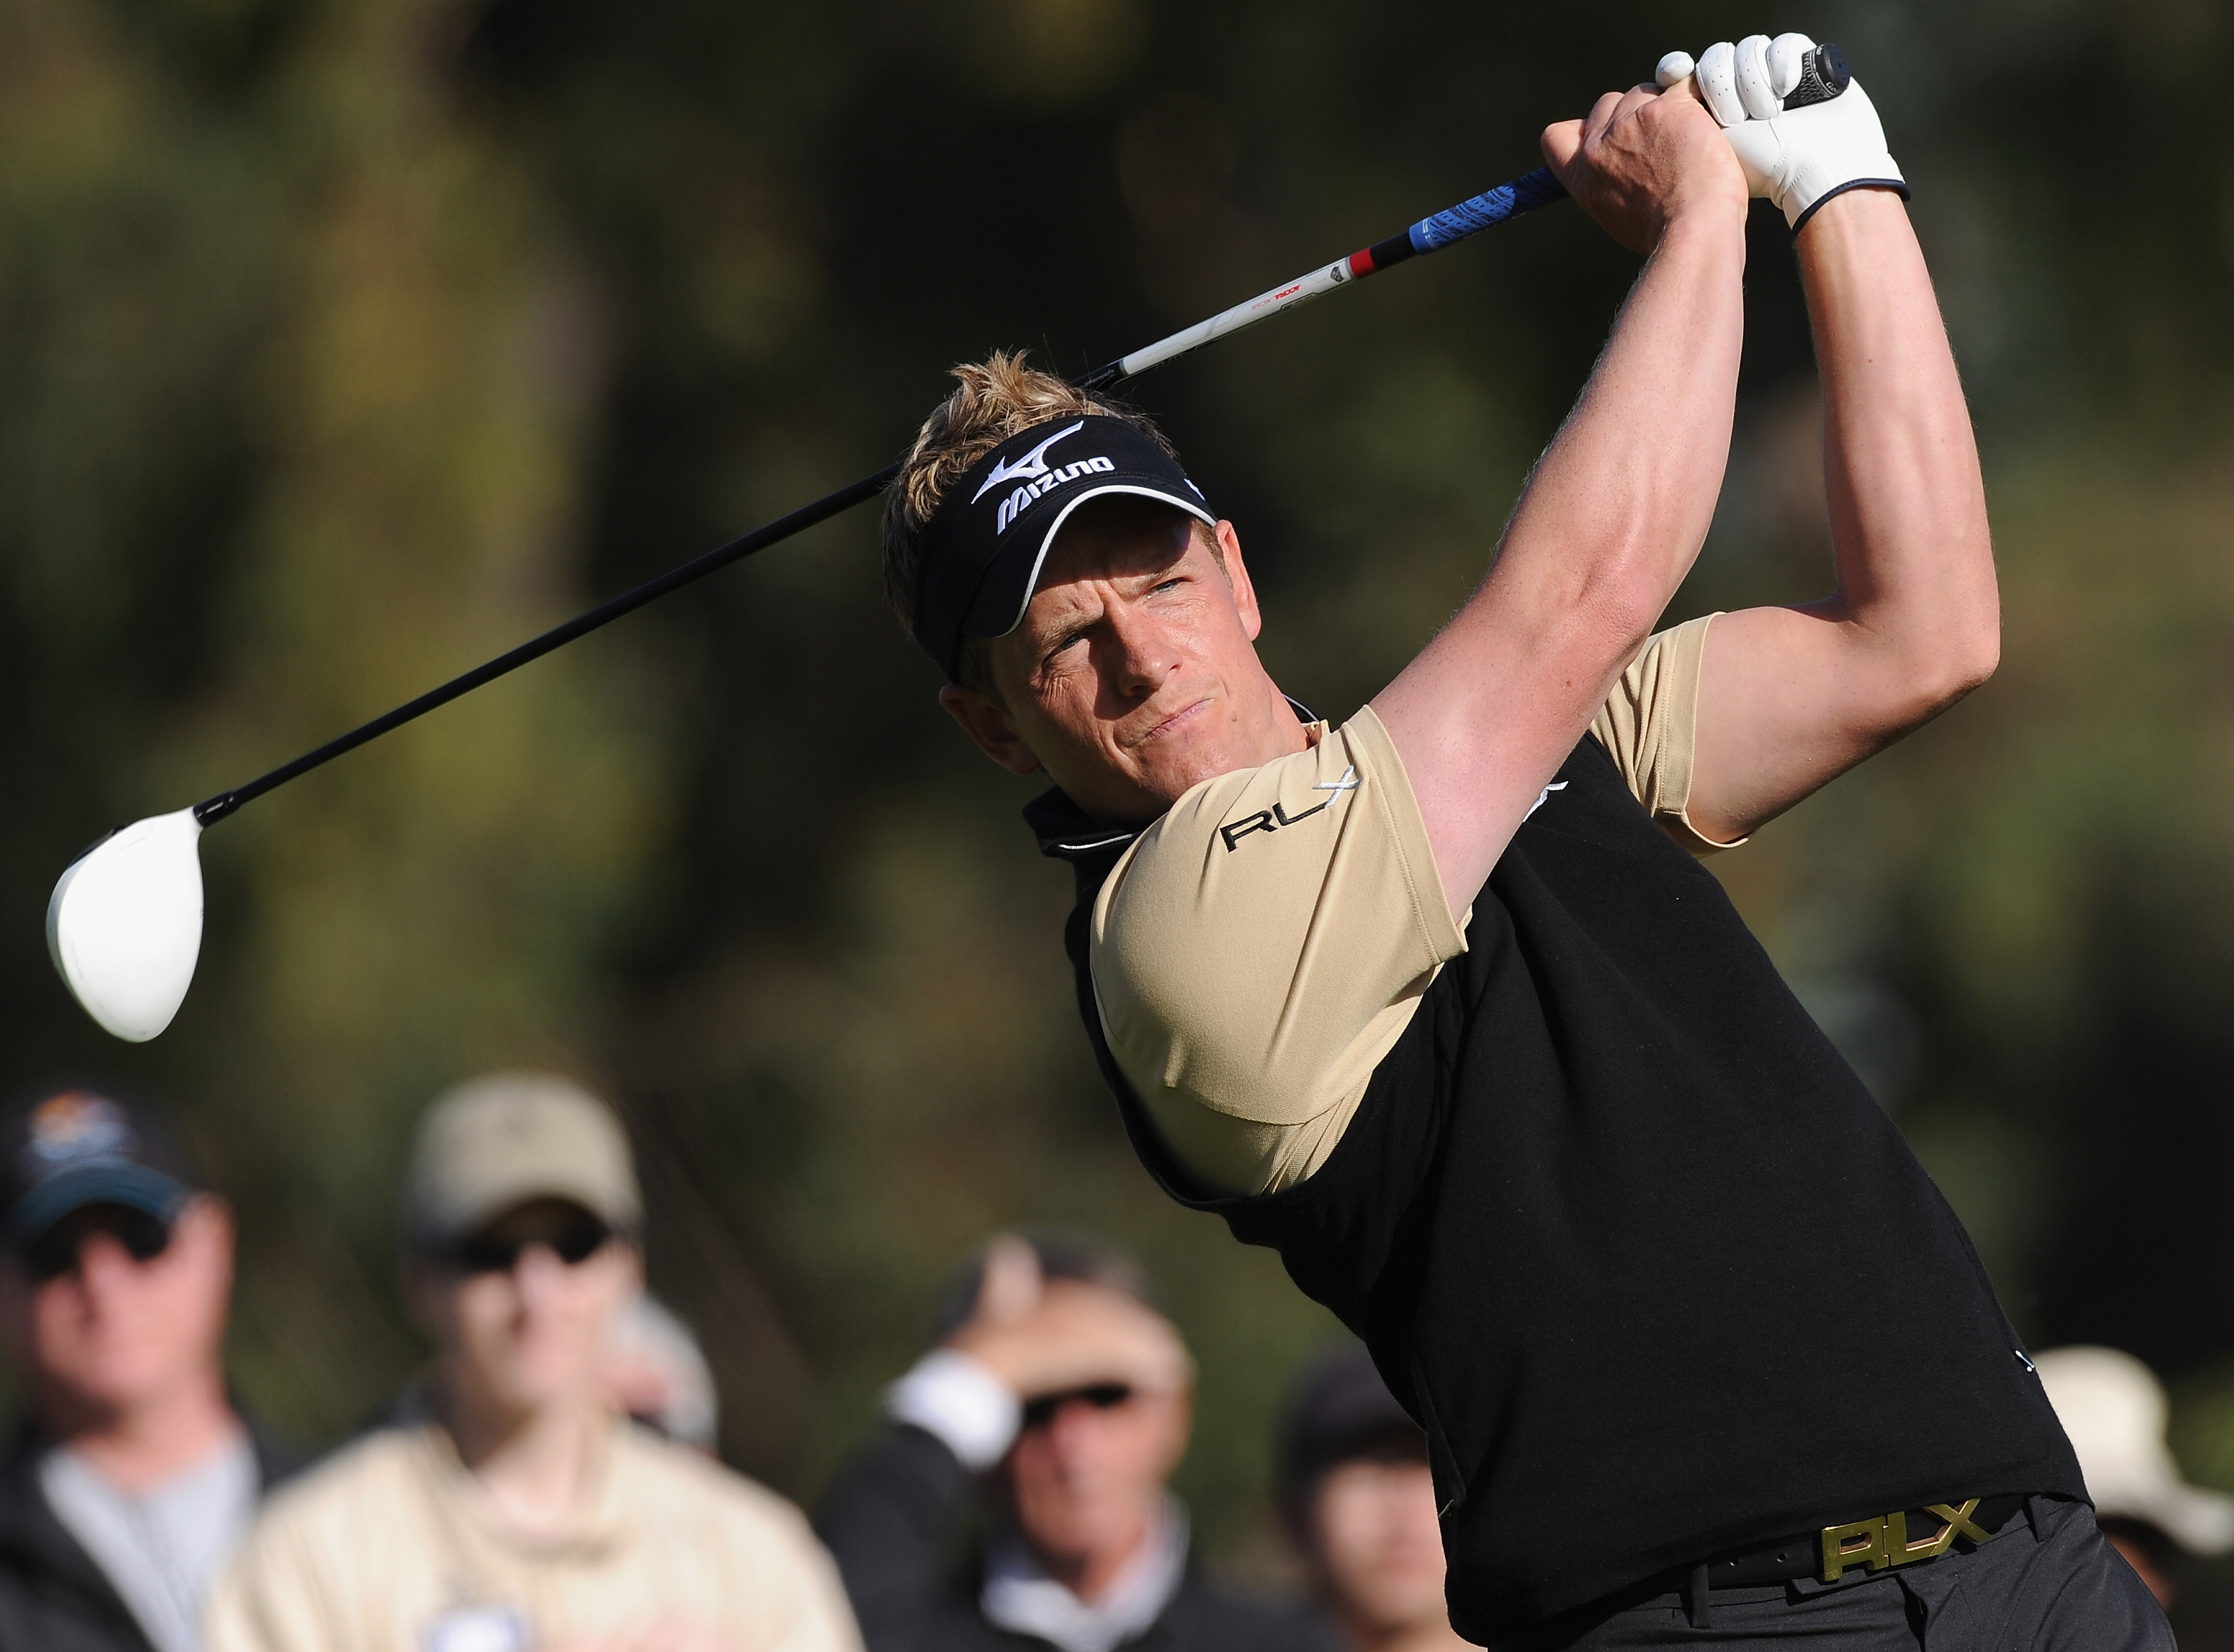 PACIFIC PALISADES, CA - FEBRUARY 17:  Luke Donald of England plays his tee shot on the second hole during the first round of the Northern Trust Open at Riviera Country Club on February 17, 2011 in Pacific Palisades, California.  (Photo by Stuart Franklin/